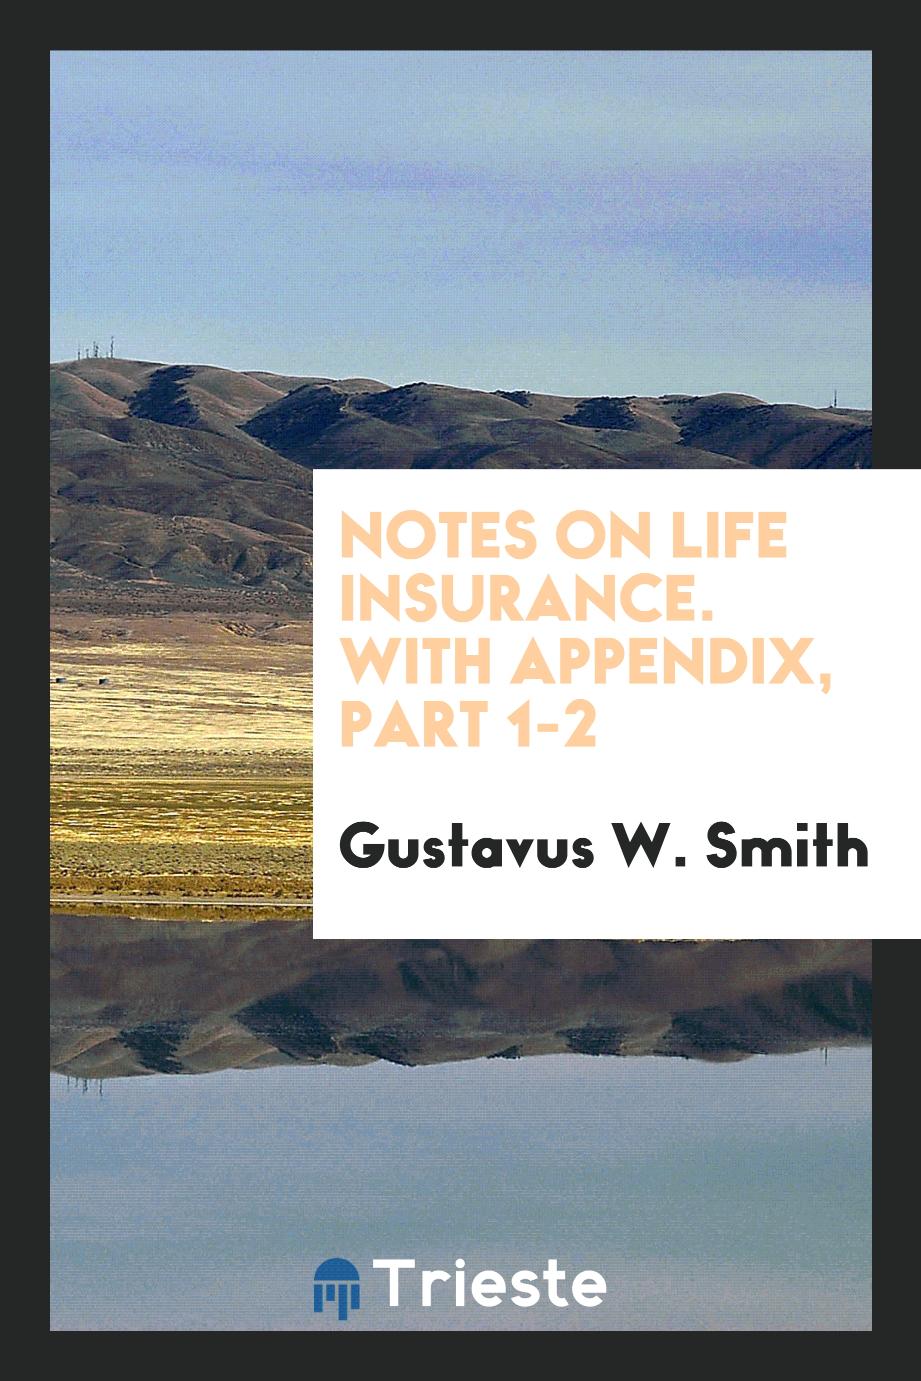 Gustavus W. Smith - Notes on life insurance. With appendix, Part 1-2